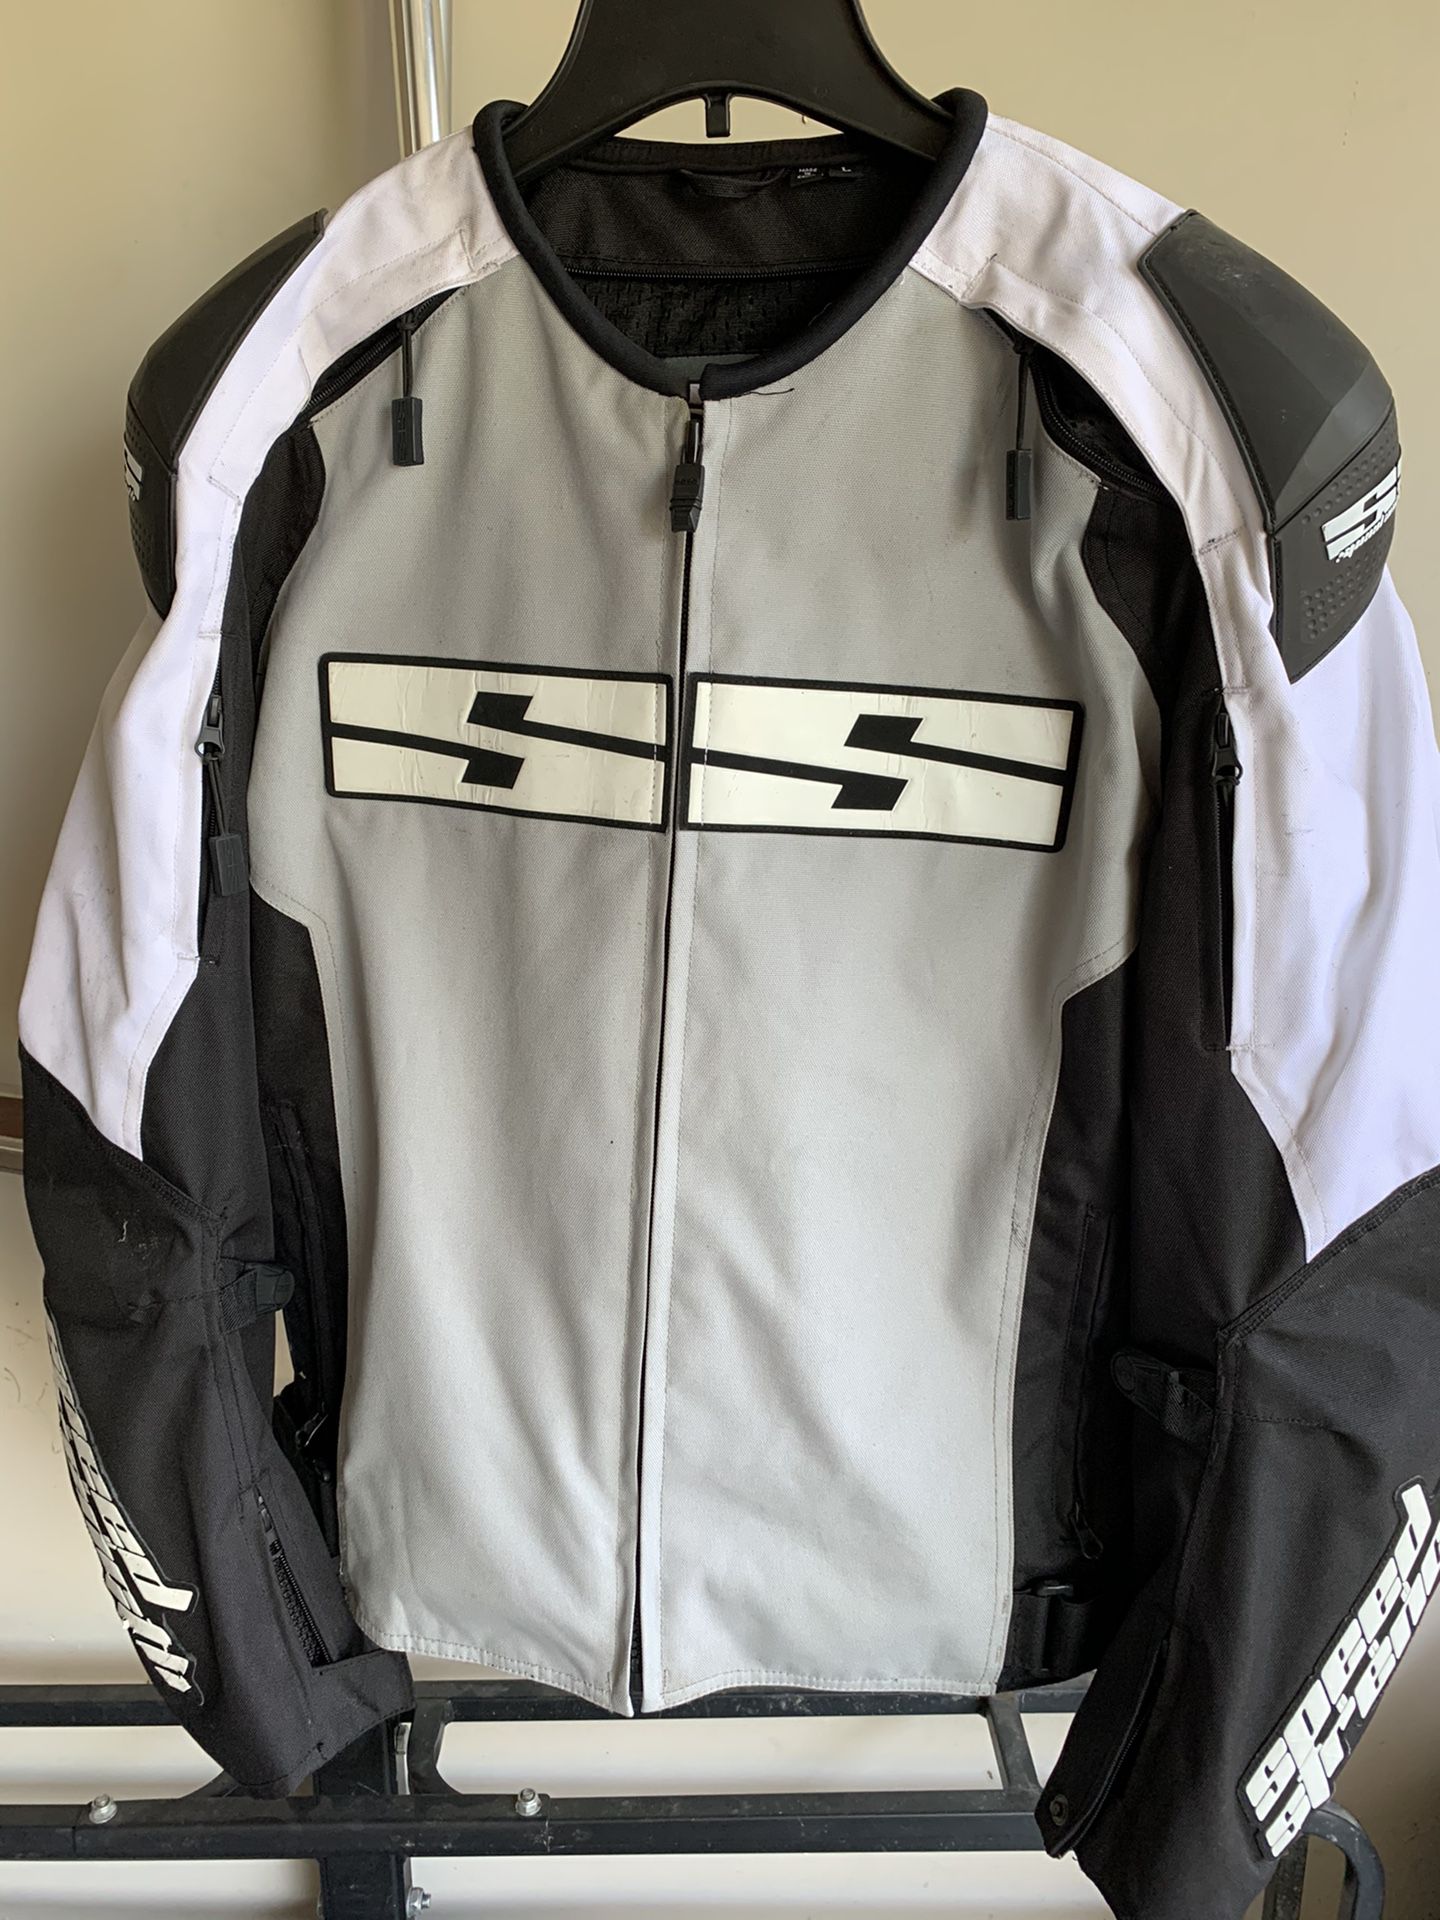 Speed and Strength light weight motorcycle jacket. Dingy but no rips or tears or road rash.